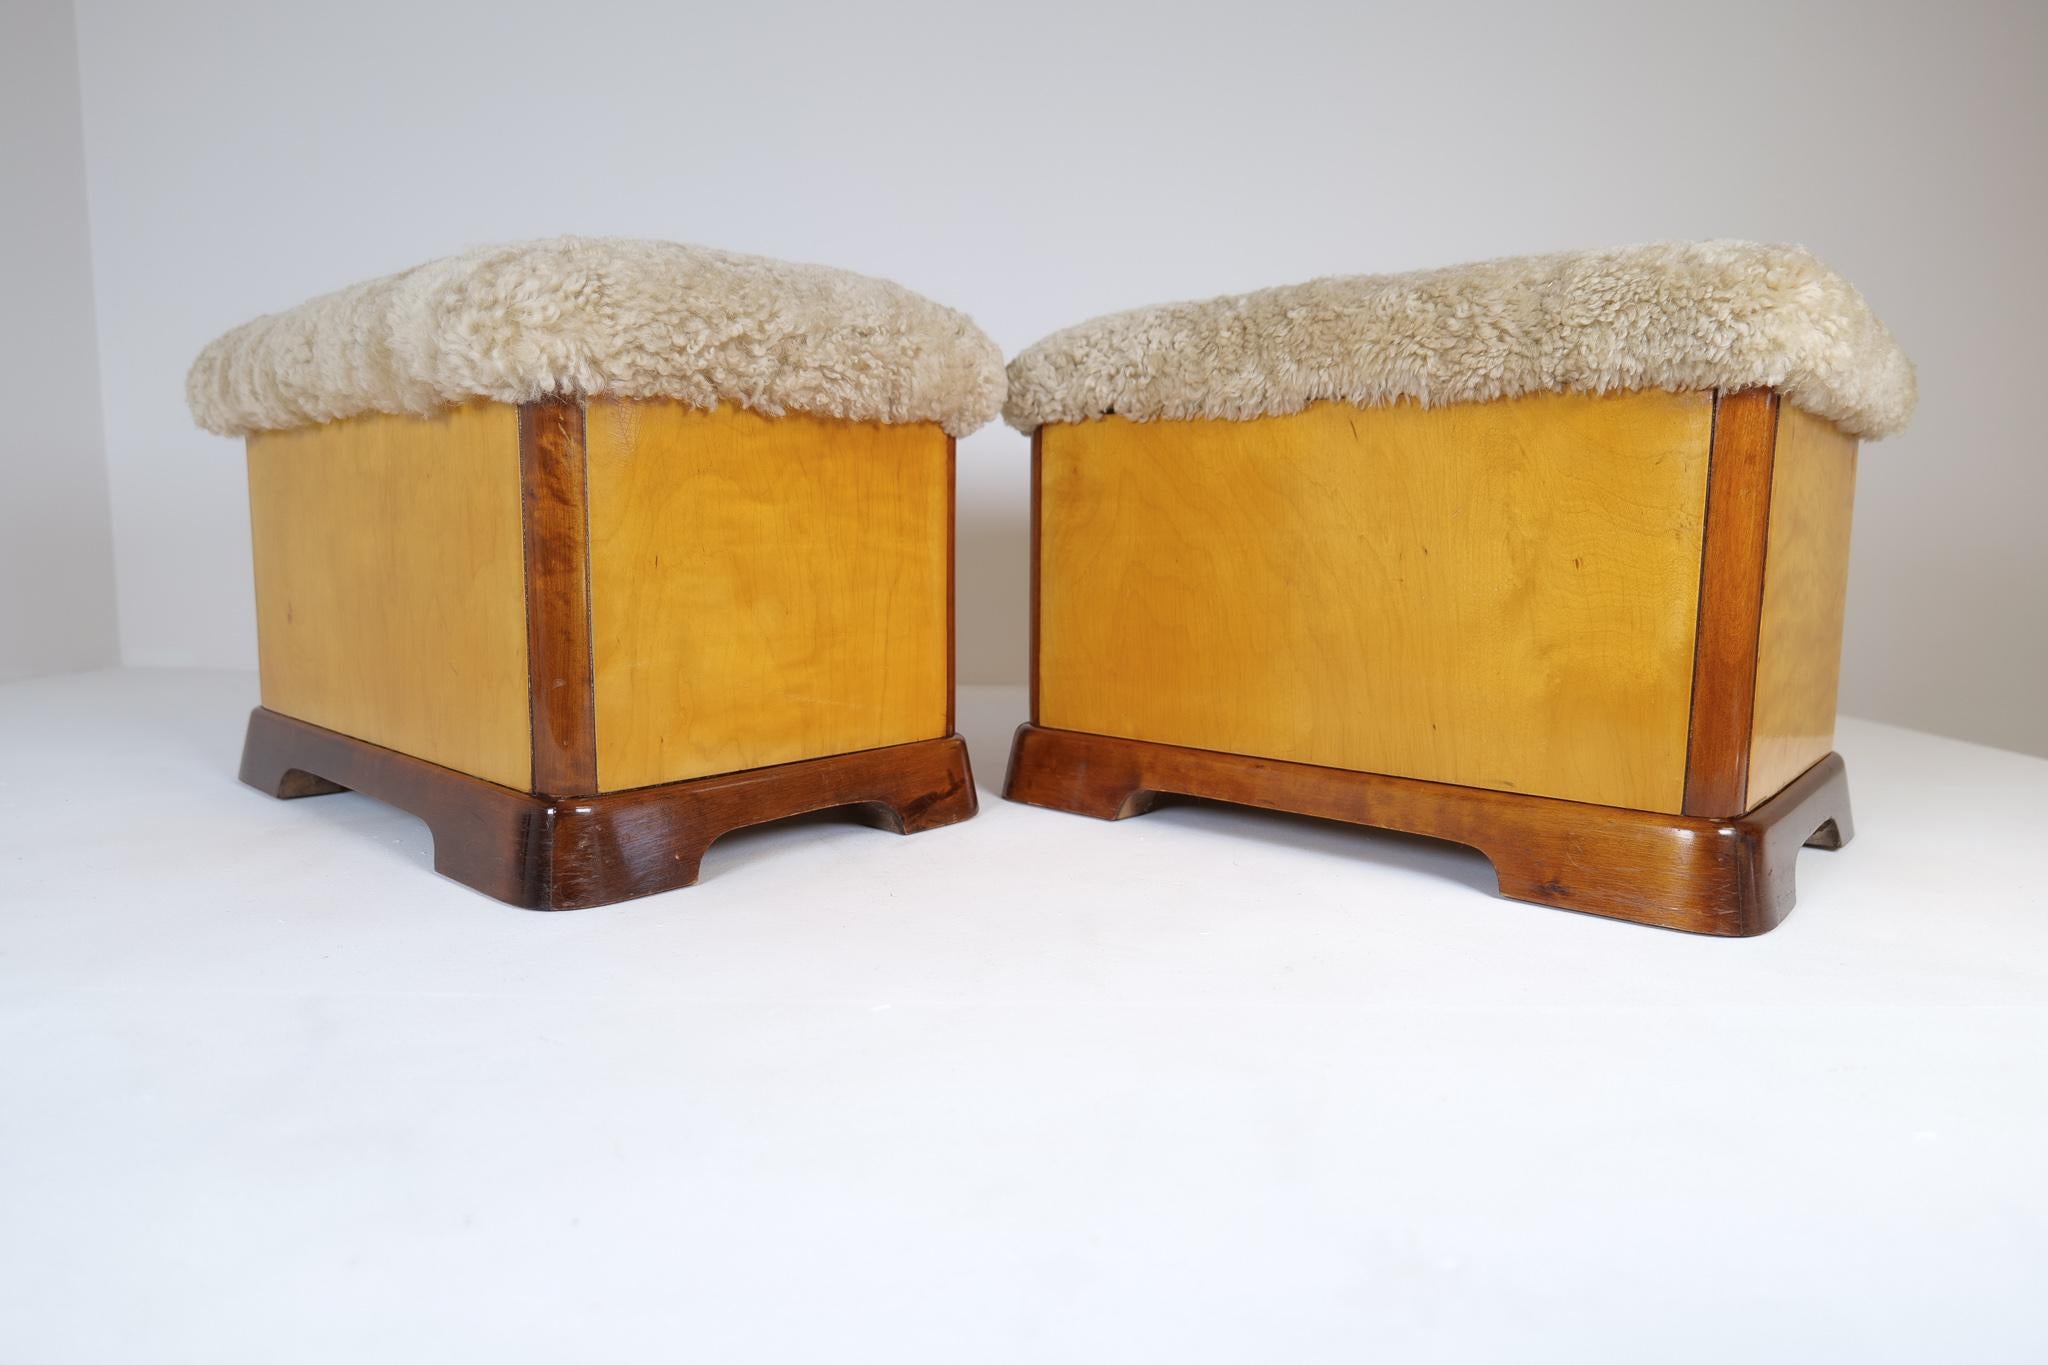 Swedish Art Deco Stools in Lacquered Birch and Sheepskin/Shearling Seat 1940s For Sale 8